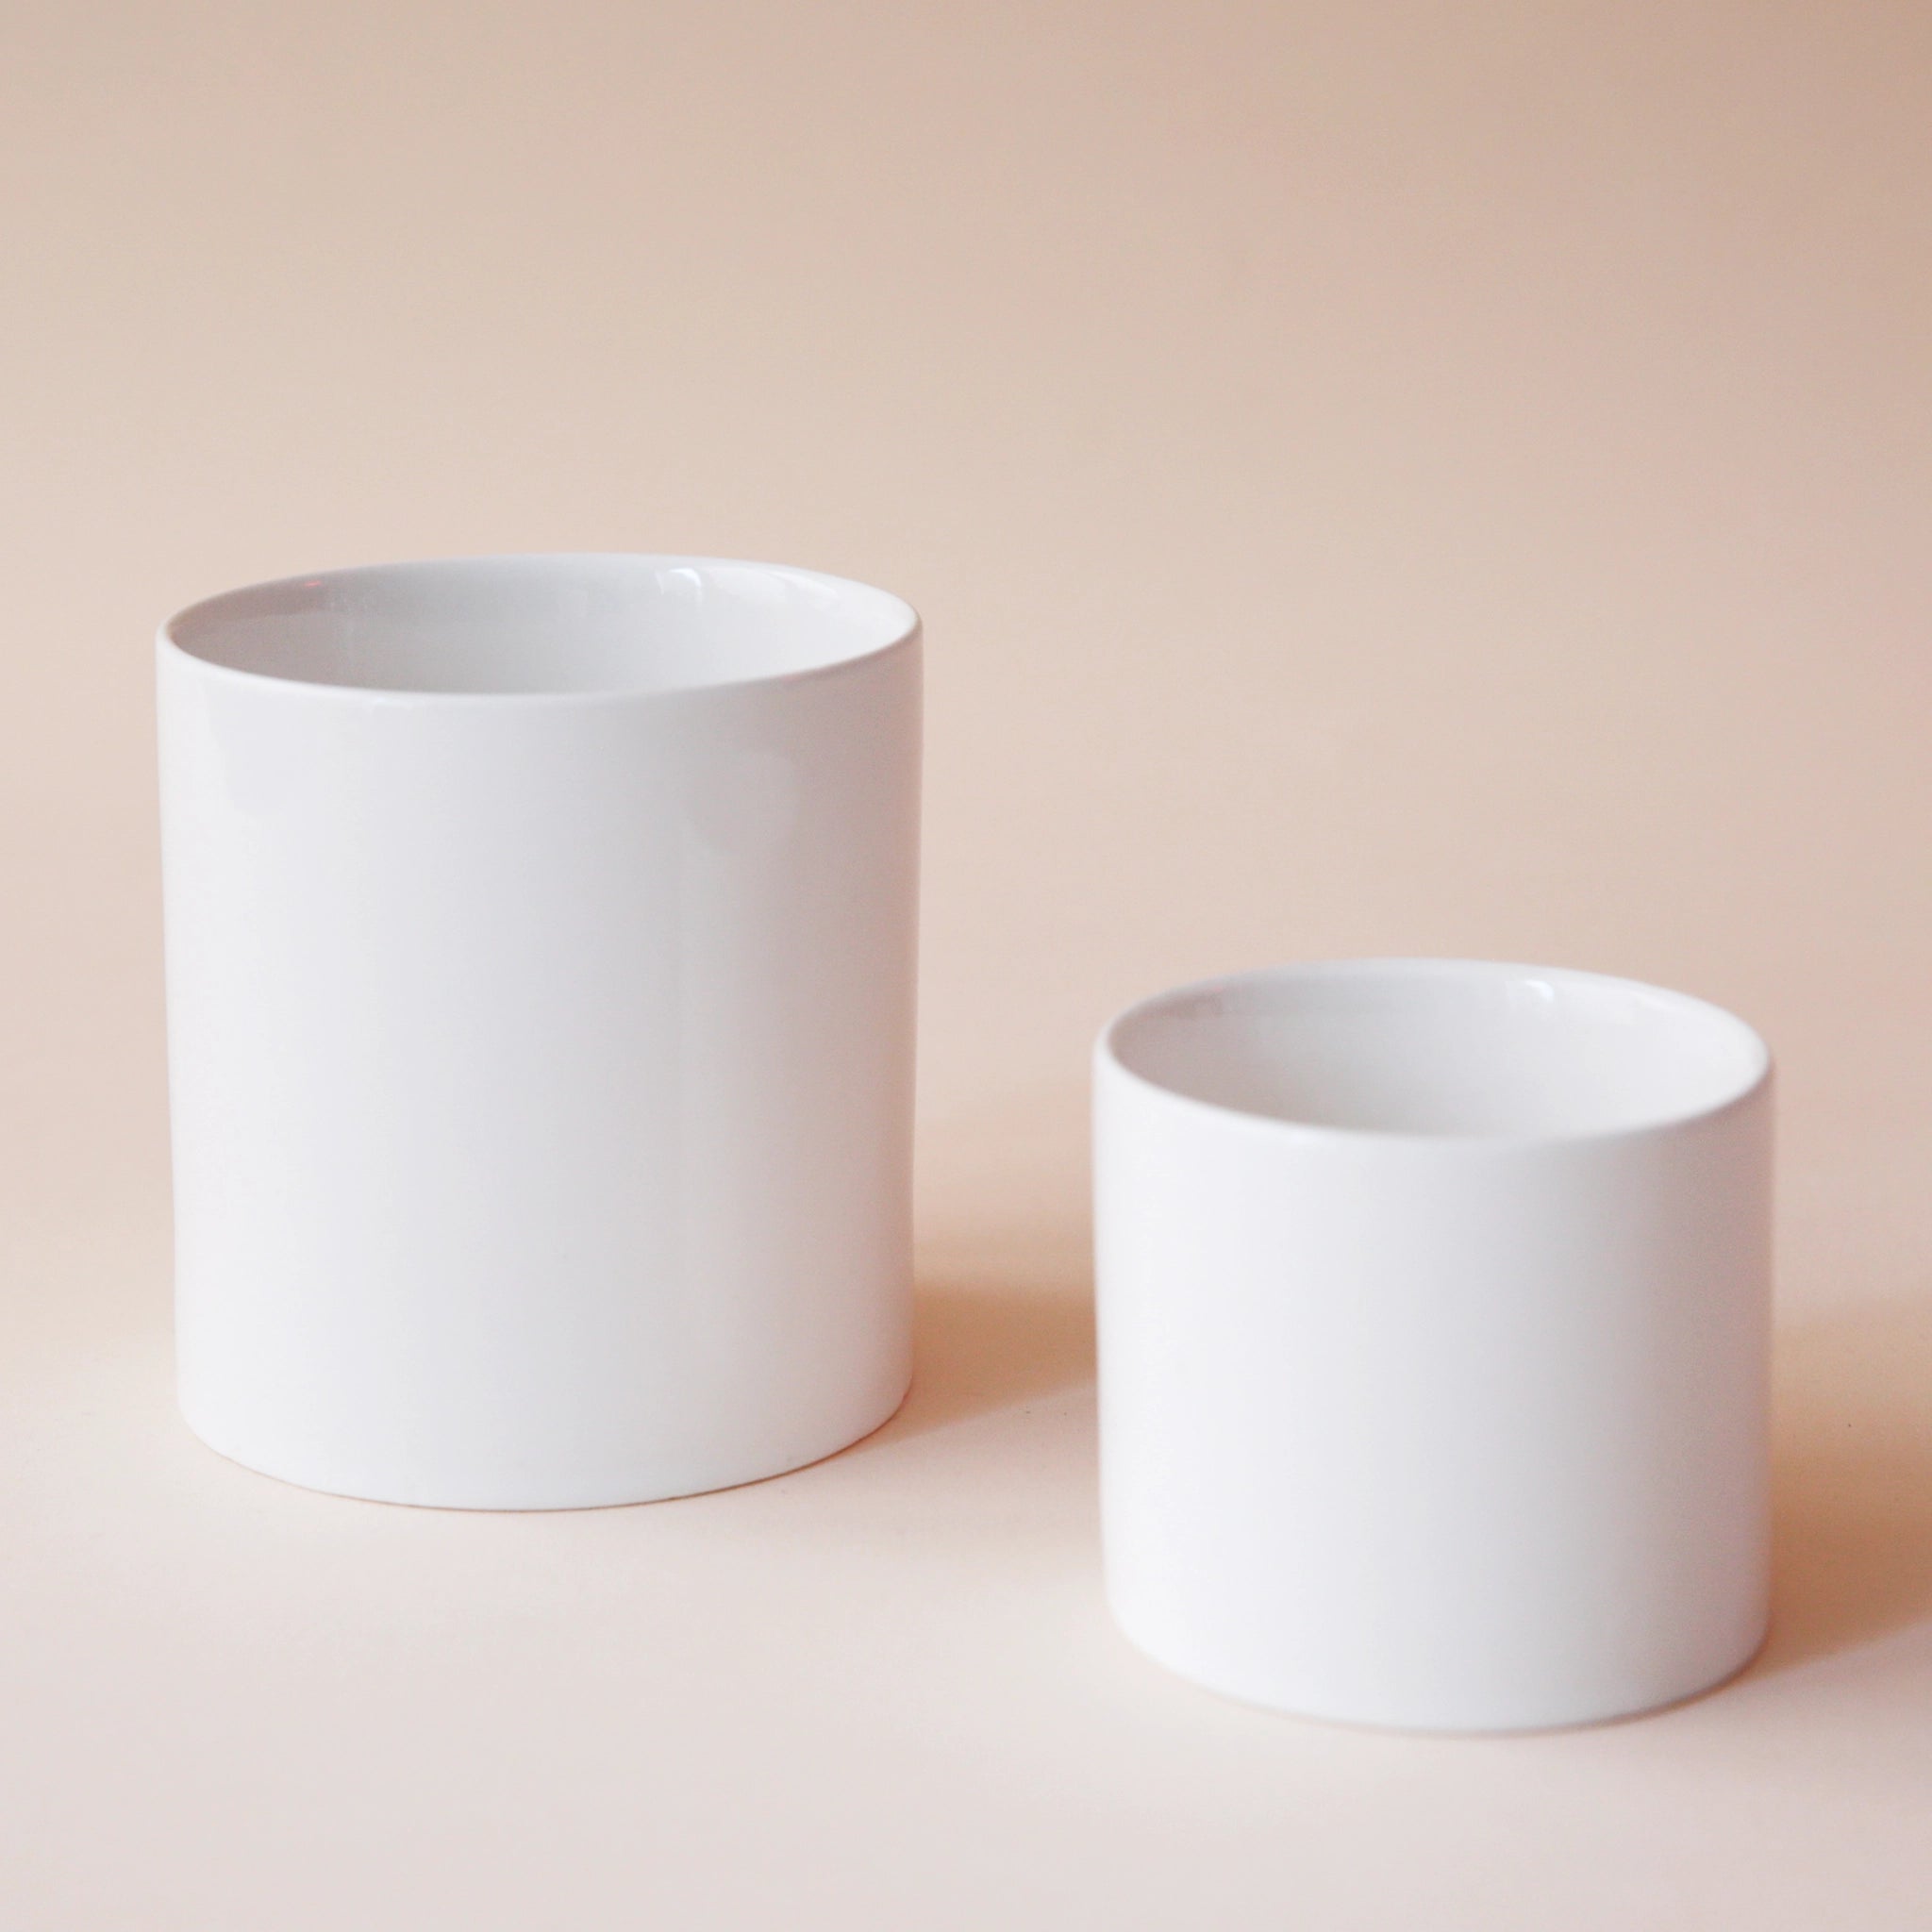 Two different sized cylinder shaped ceramic pots with a glossy finish and a slightly imperfect rim.